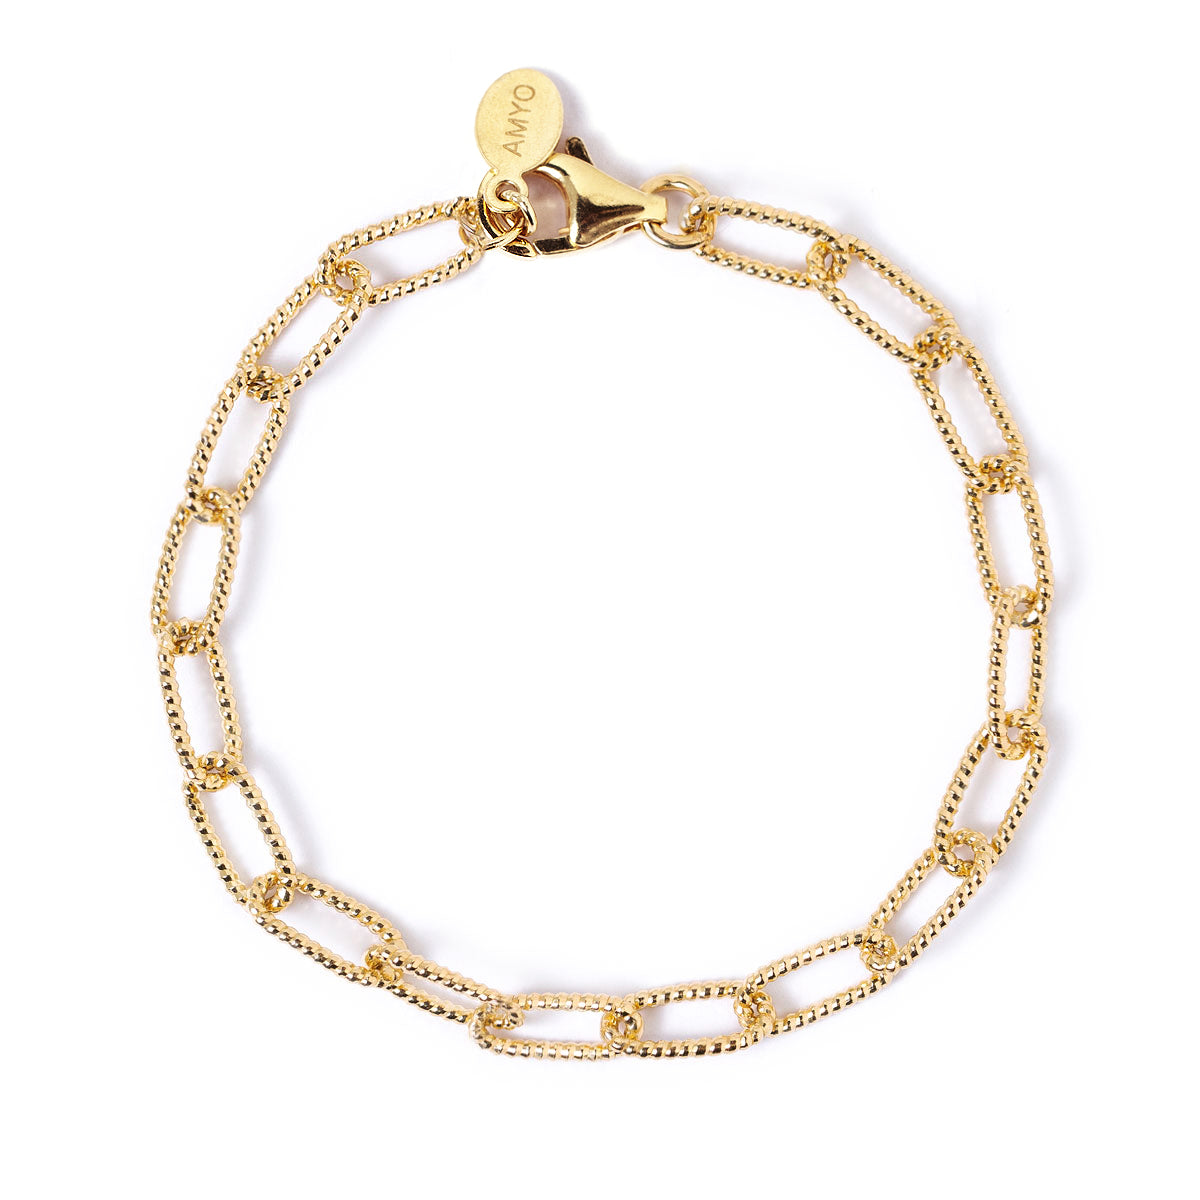 Chunky Thick Link Chain Bracelet, Chain Link Gold bracelet – AMYO Jewelry